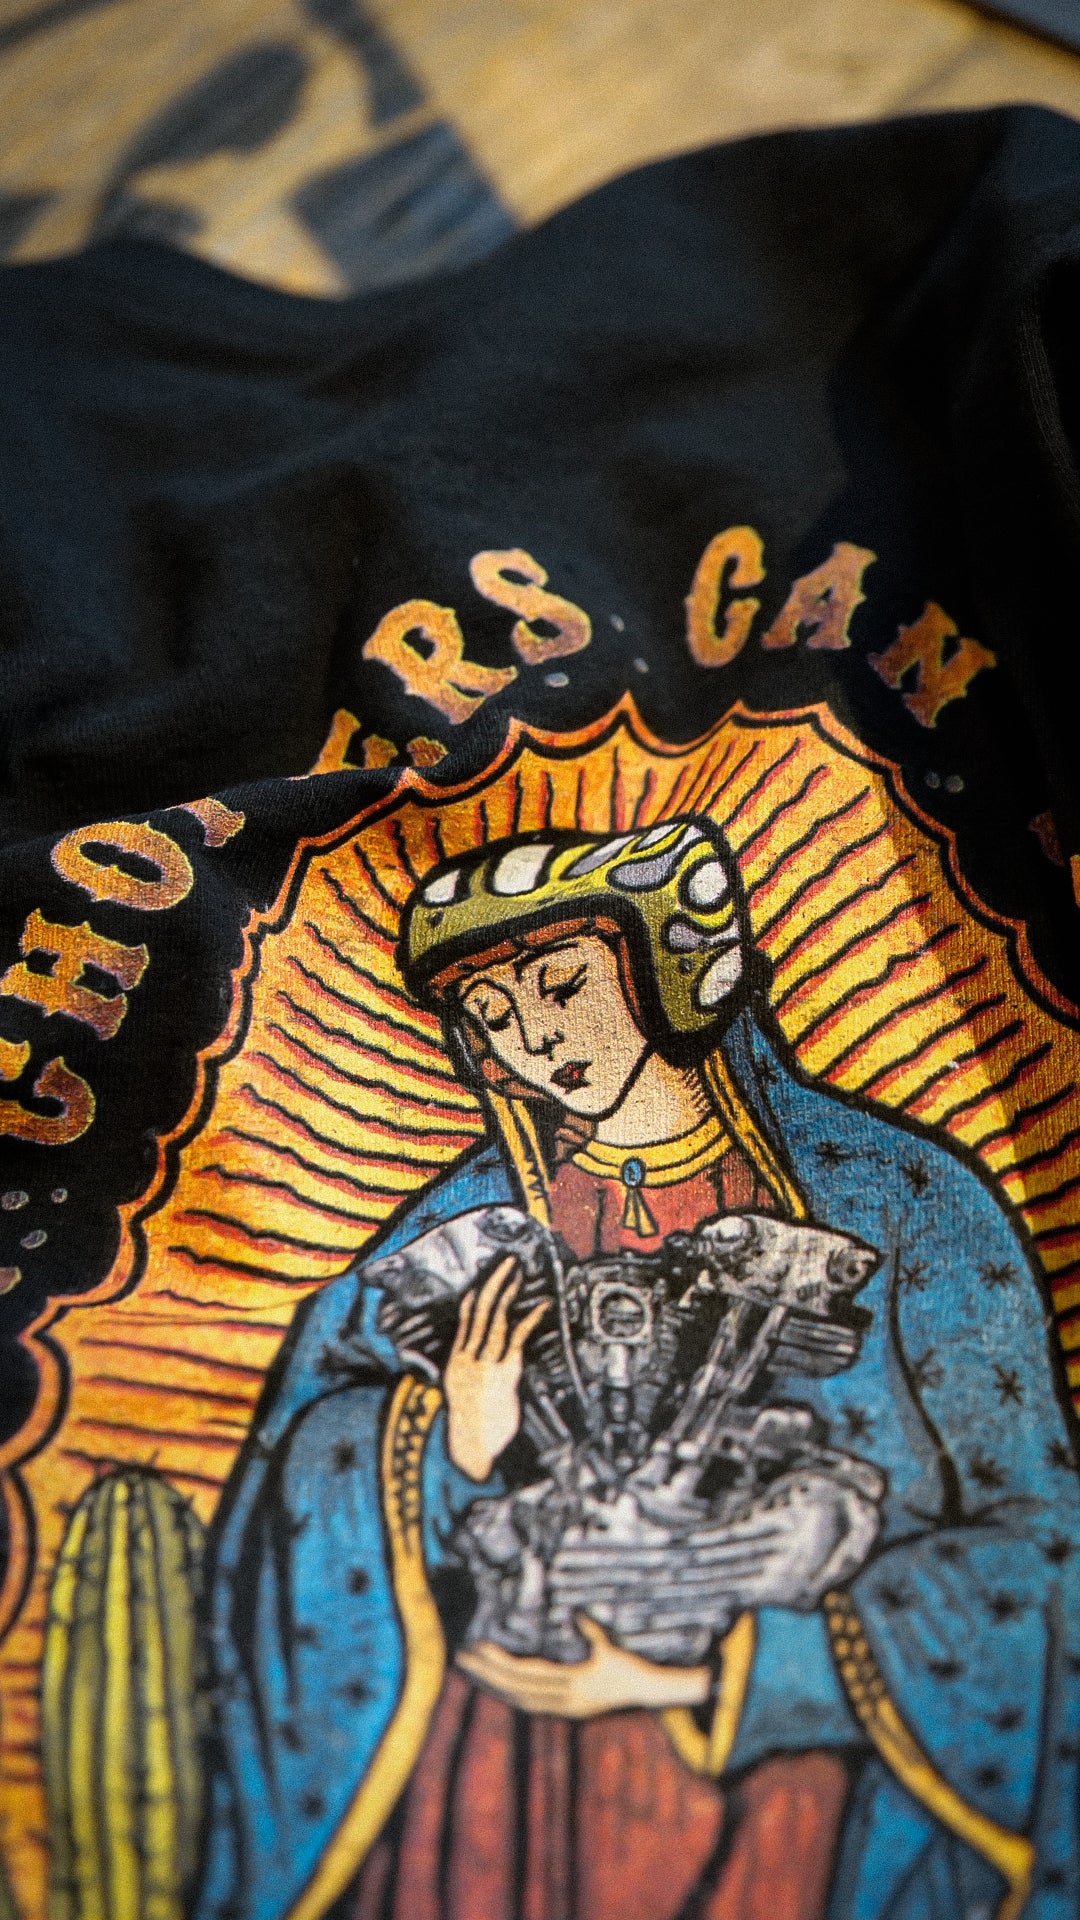 Mother of Choppers T-shirt | PREORDER